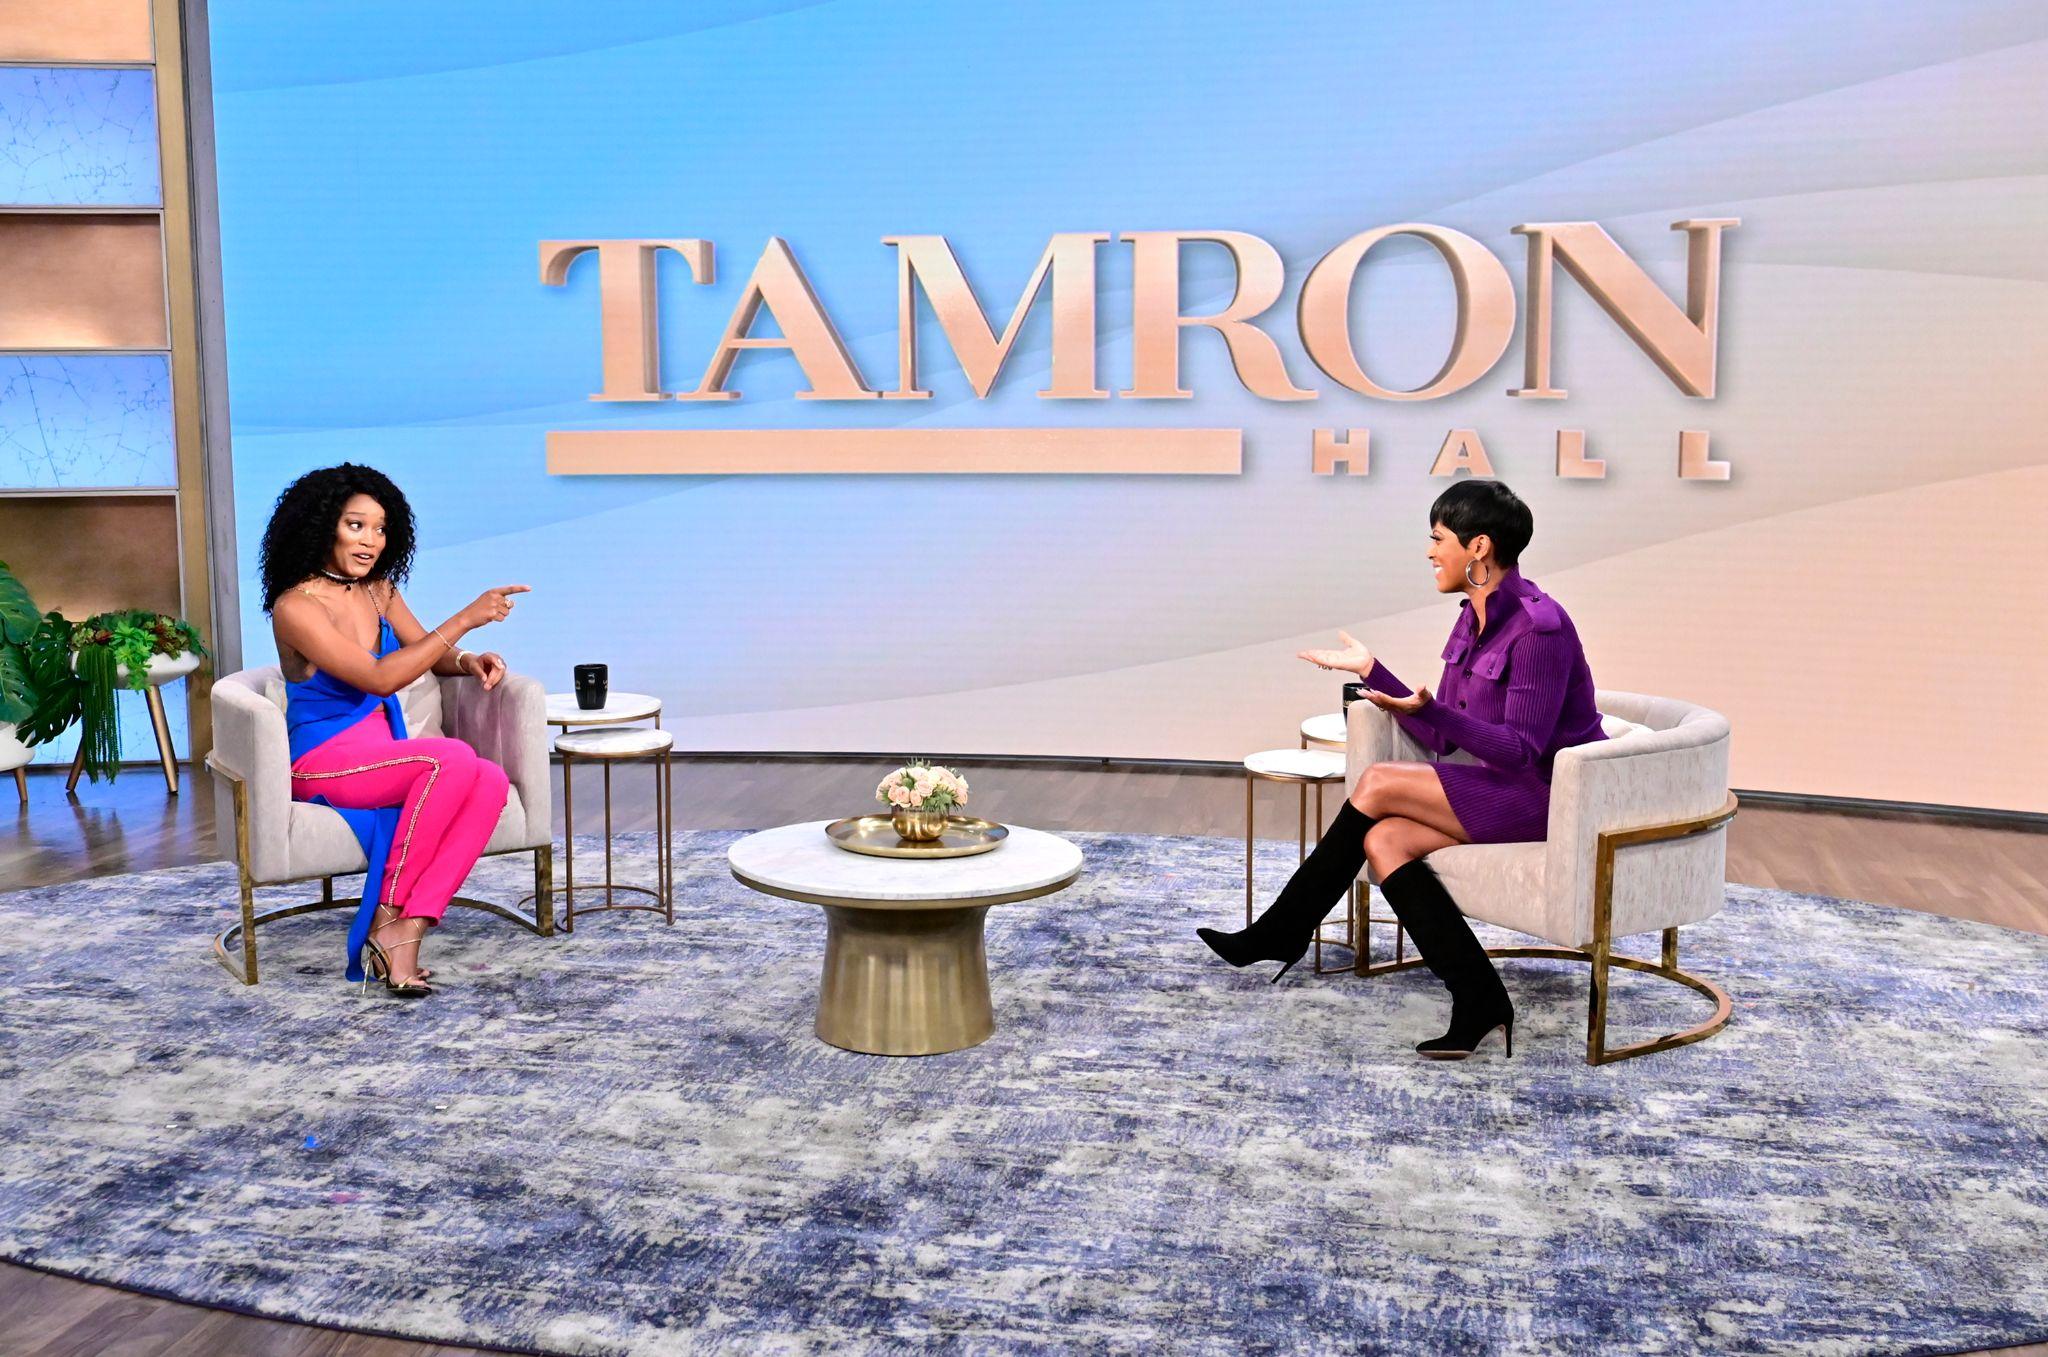 Keke Palmer On Going Public With Relationship On “Tamron Hall”